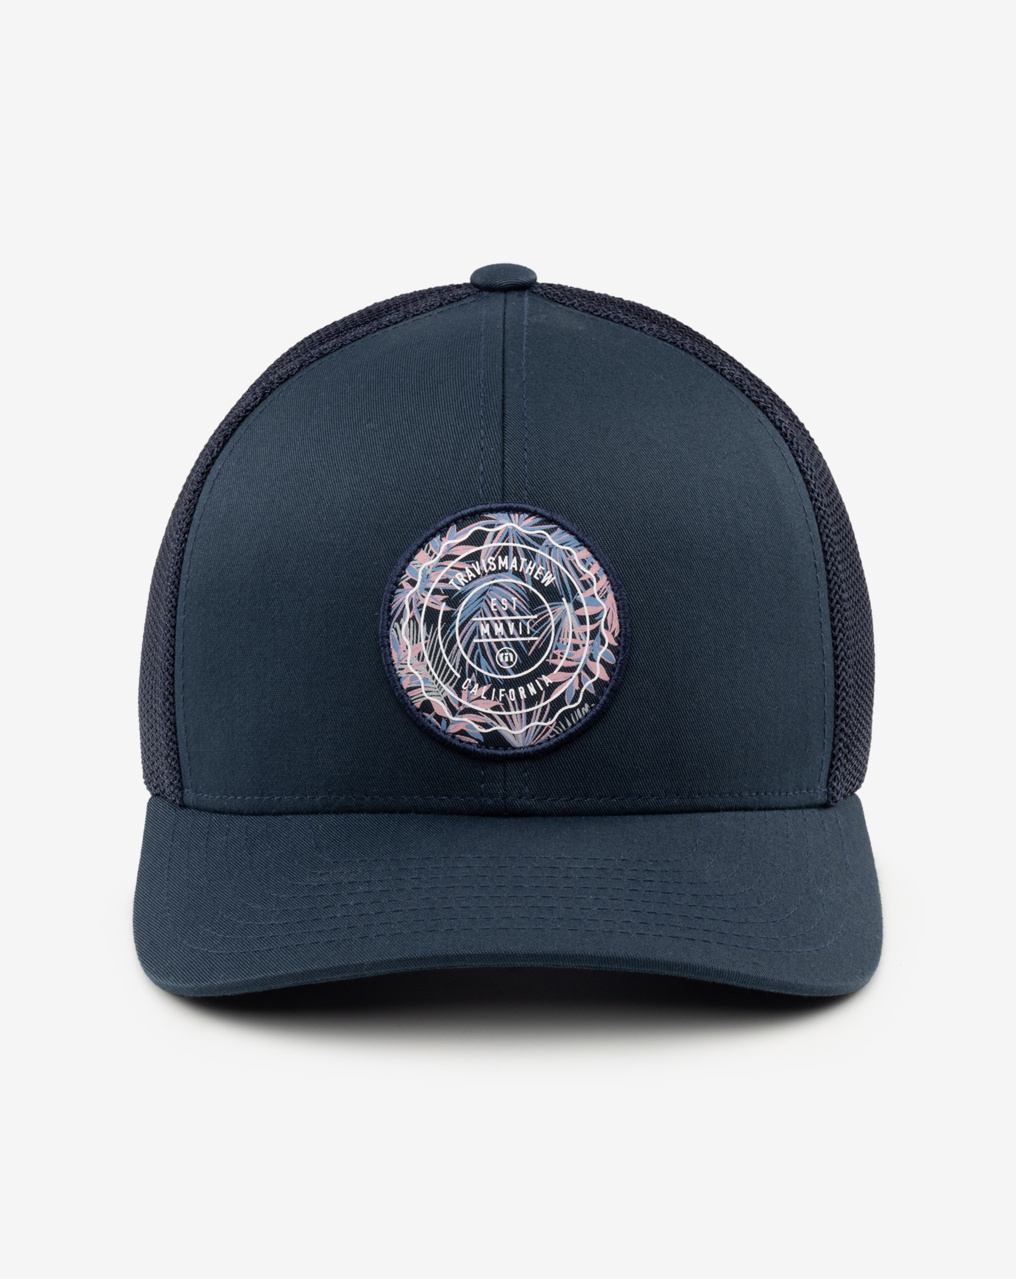 THE PATCH FLORAL SNAPBACK HAT 1